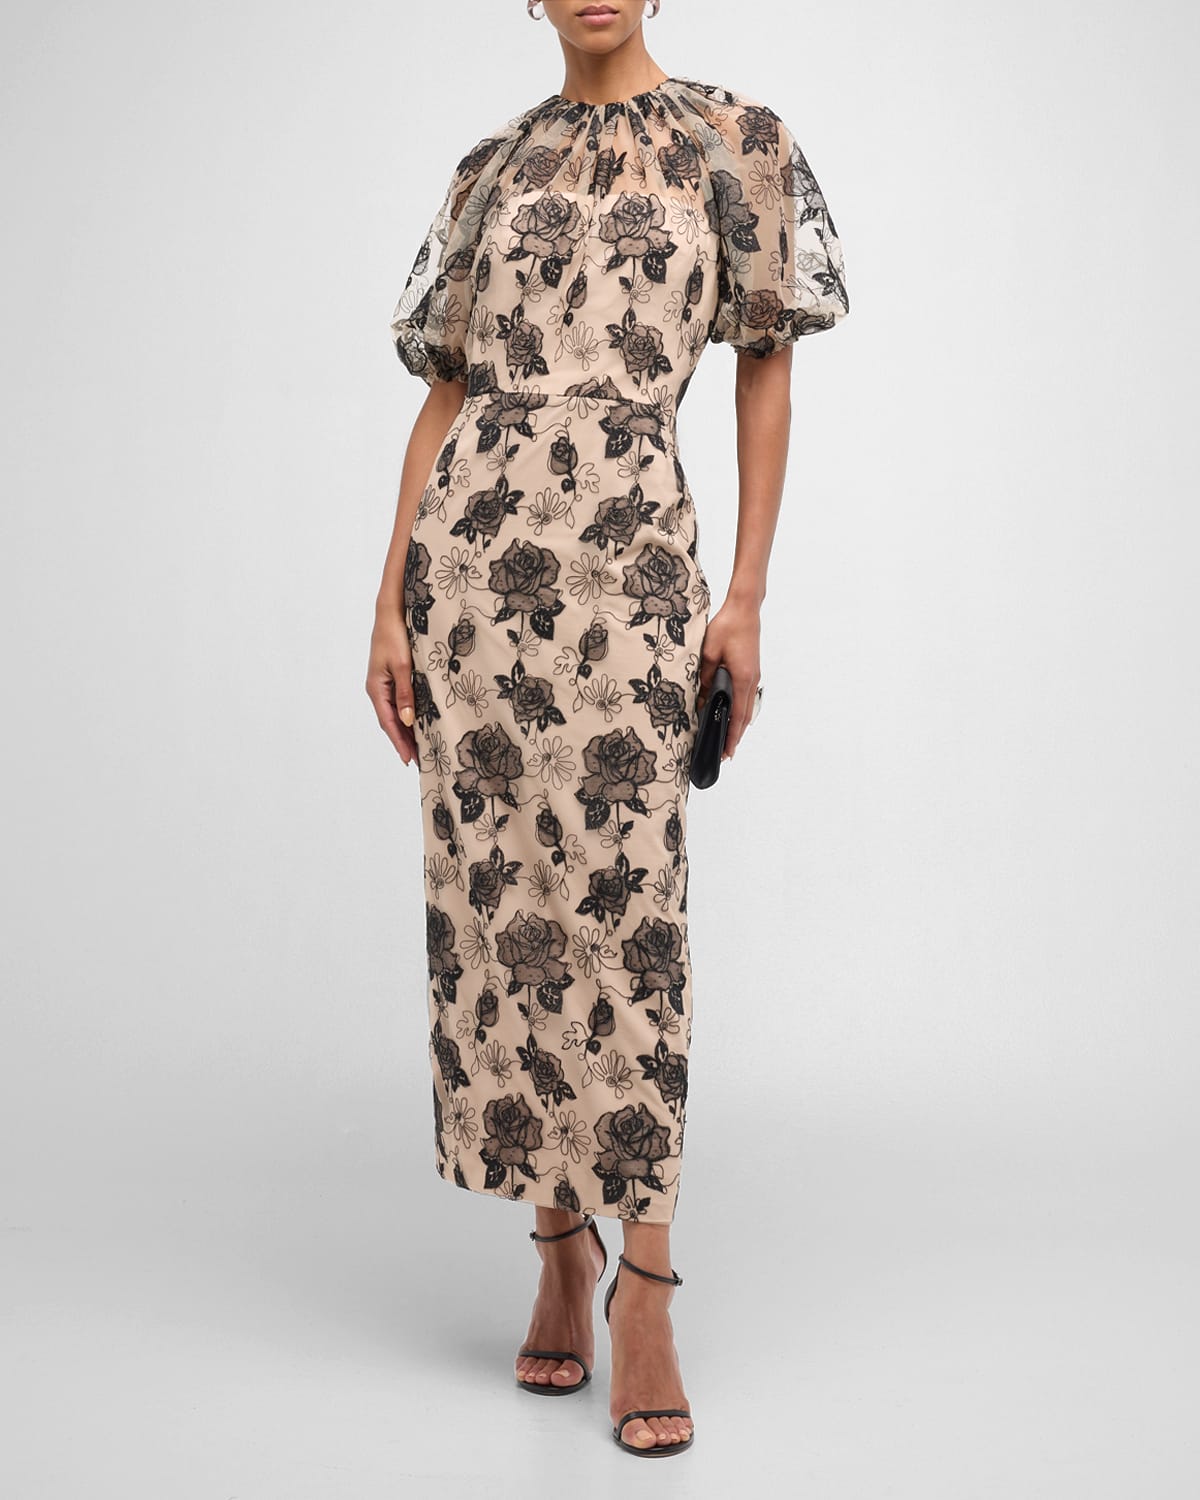 Lela Rose Naomi Sheath Dress With Floral Embroidery In Nude